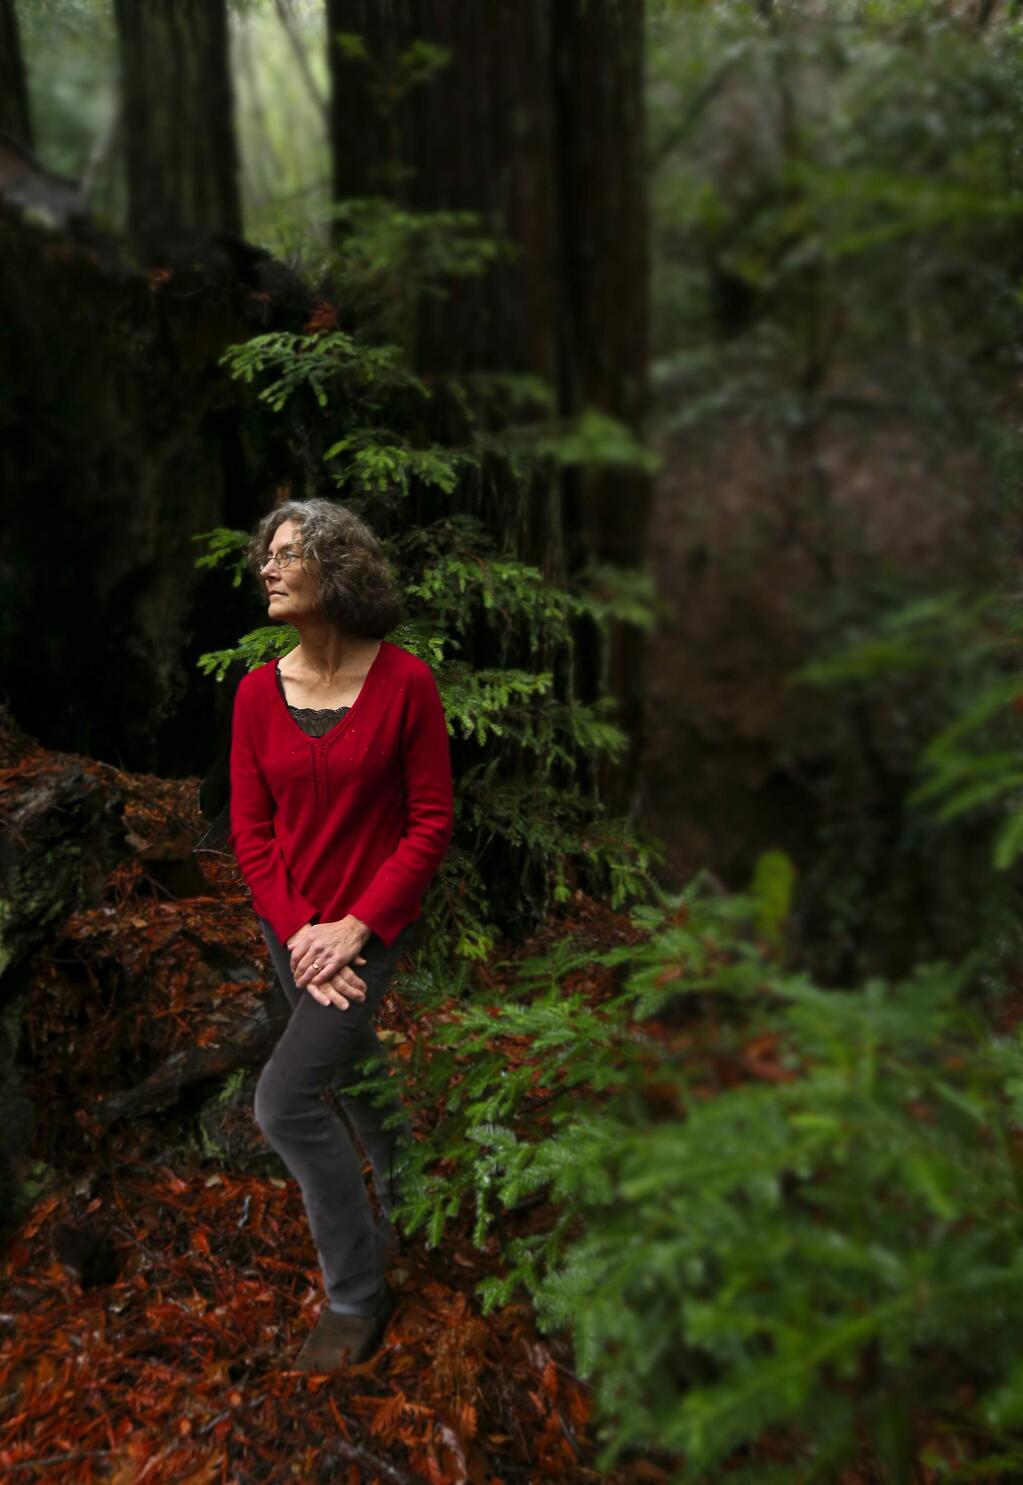 Healdsburg author Jean Hegland lives in the forest west of Healdsburg. Her first novel, 'Into the Forest,' has been made into a movie starring Ellen Page. (JOHN BURGESS / The Press Democrat)